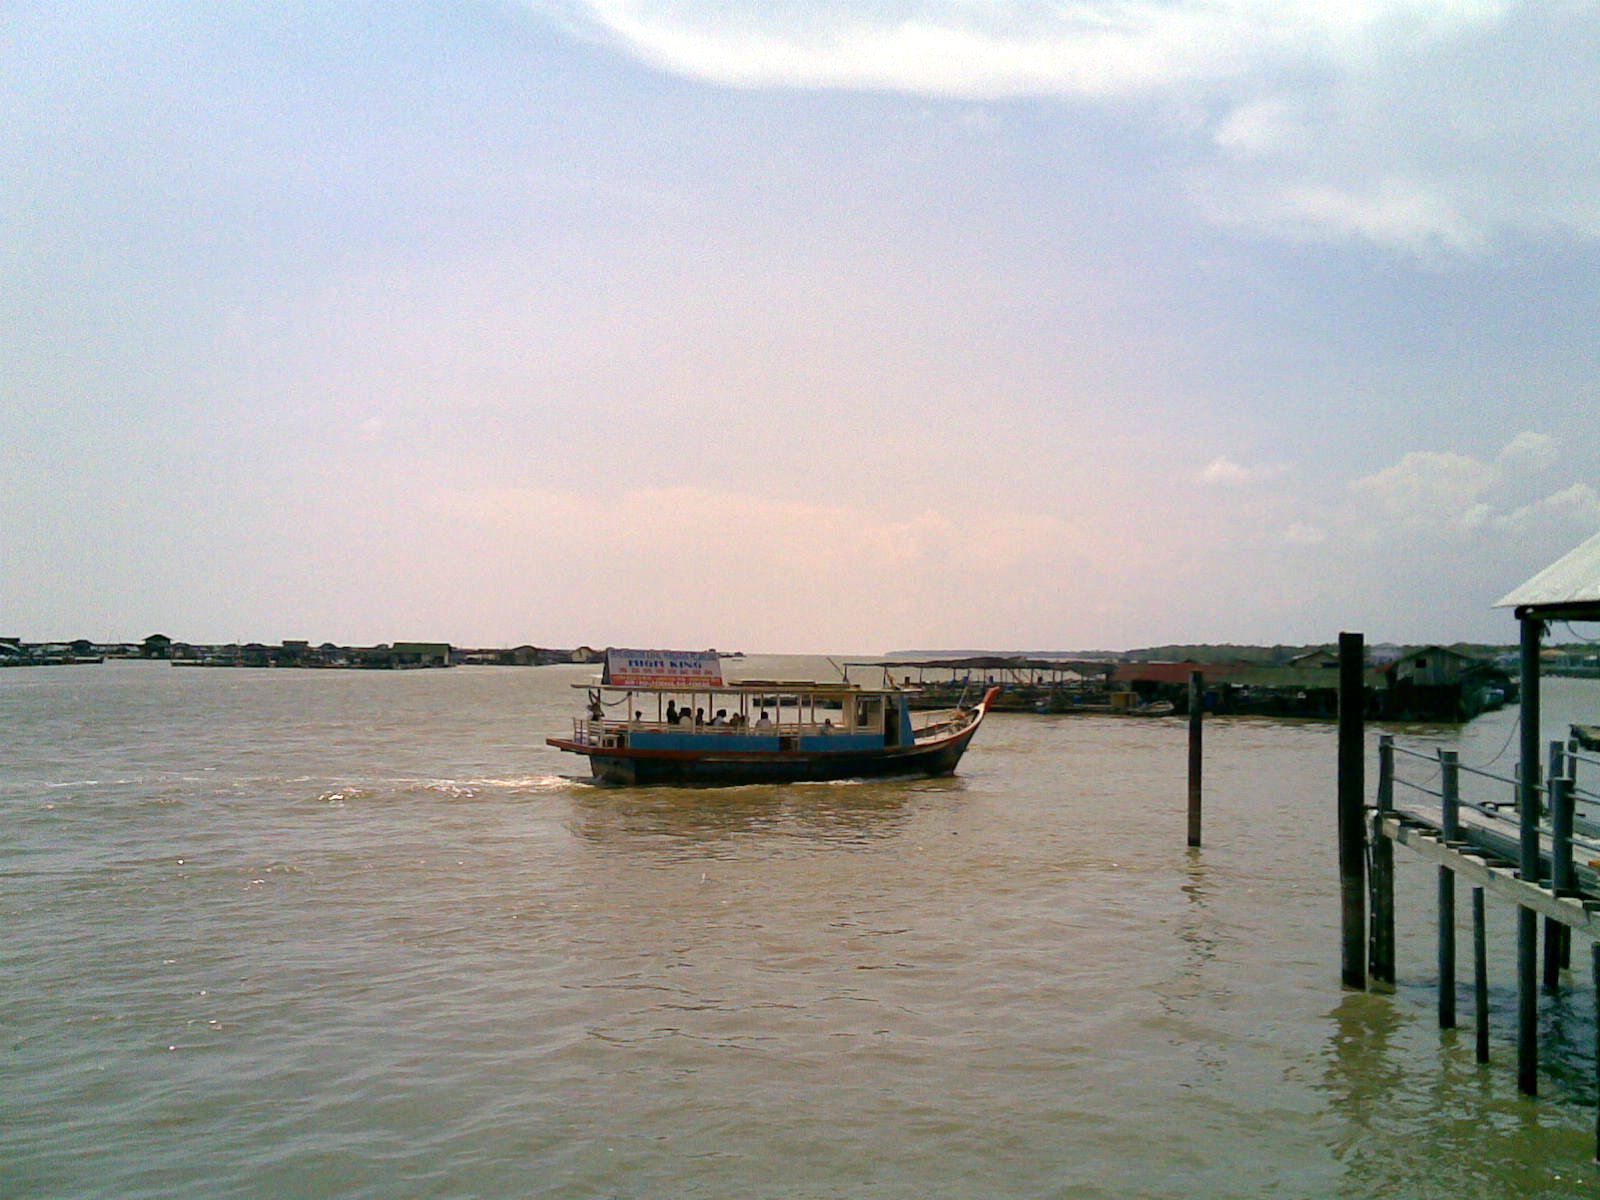 boat on river with bridge in distance and cloudy sky